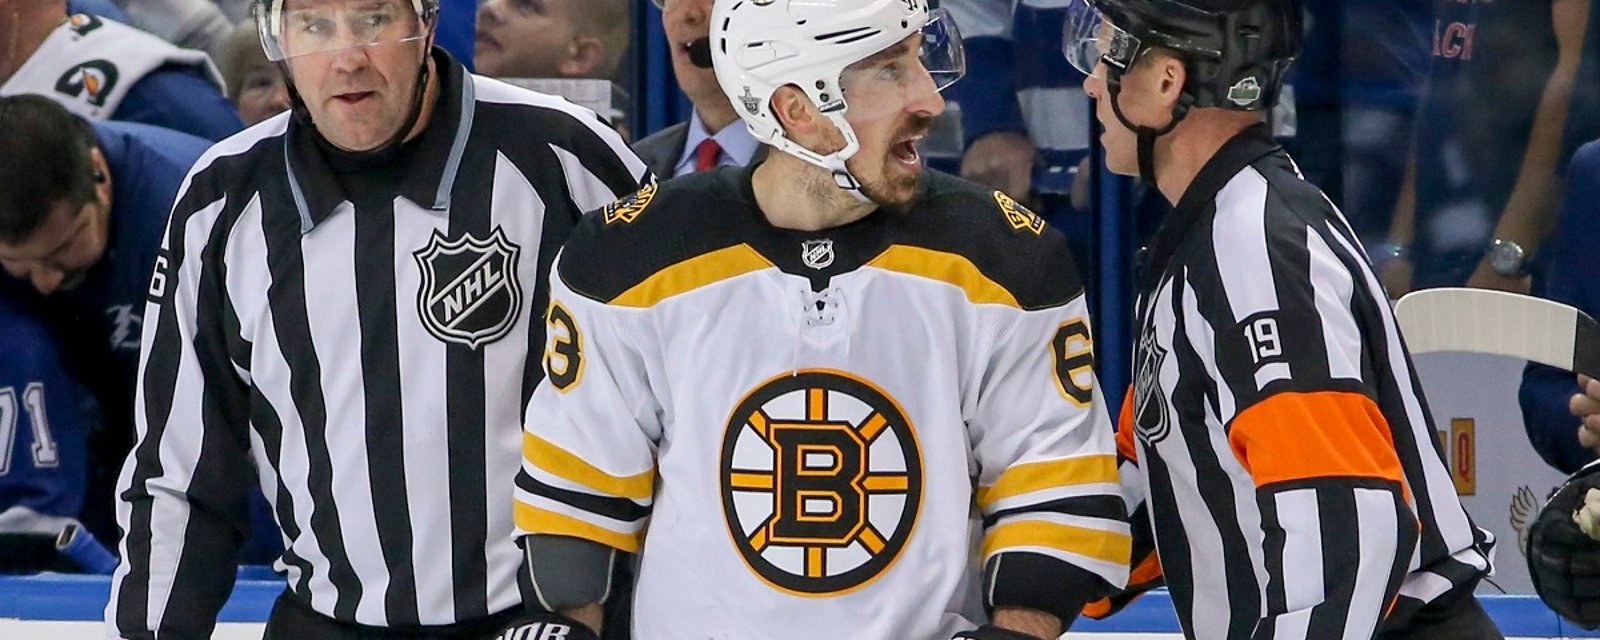 Brad Marchand makes controversial statement on NHL officiating in the playoffs.